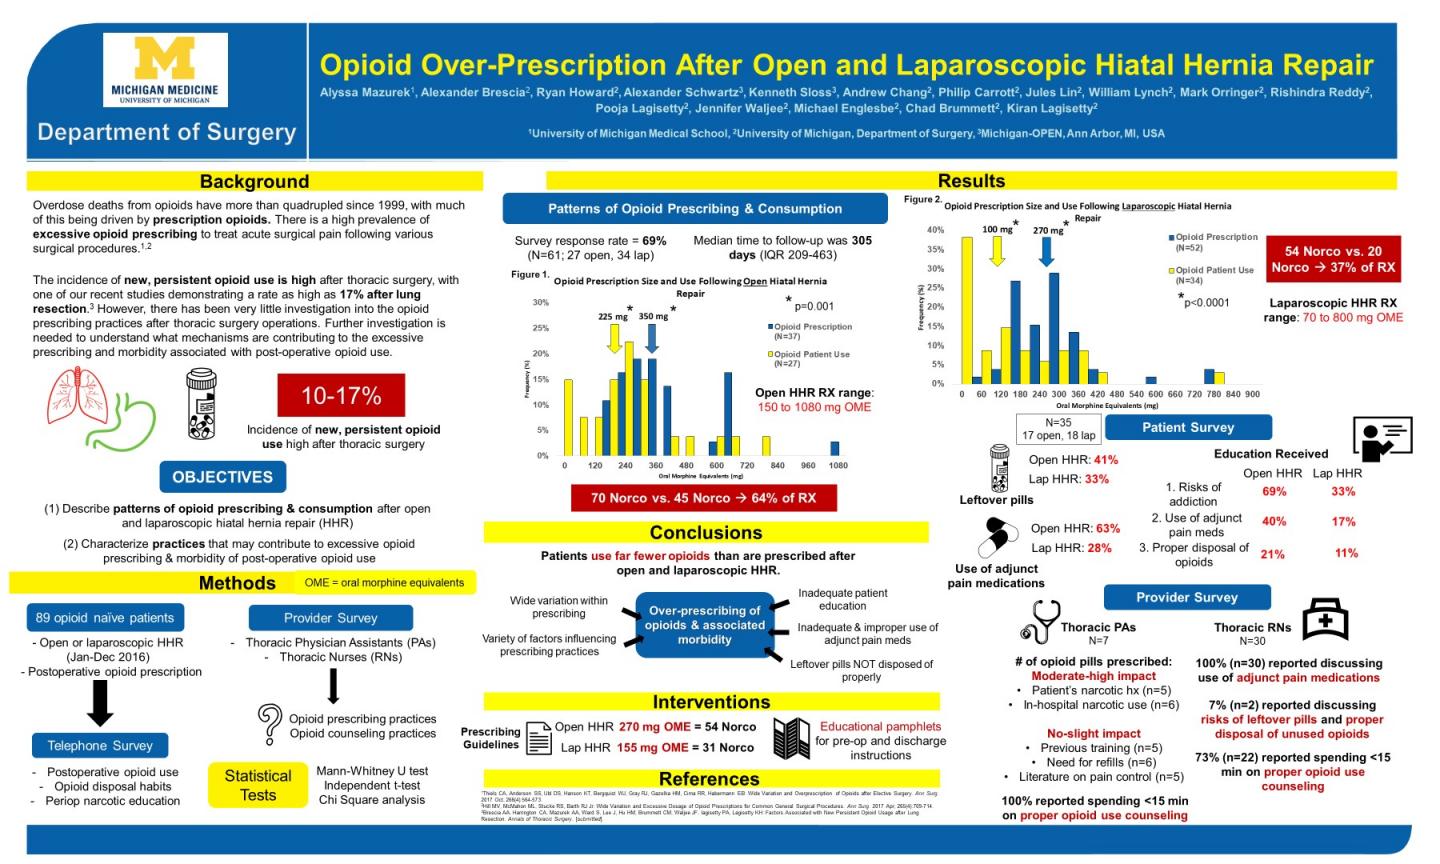 Opioids Over-Prescribed after Hiatal Hernia Surgery